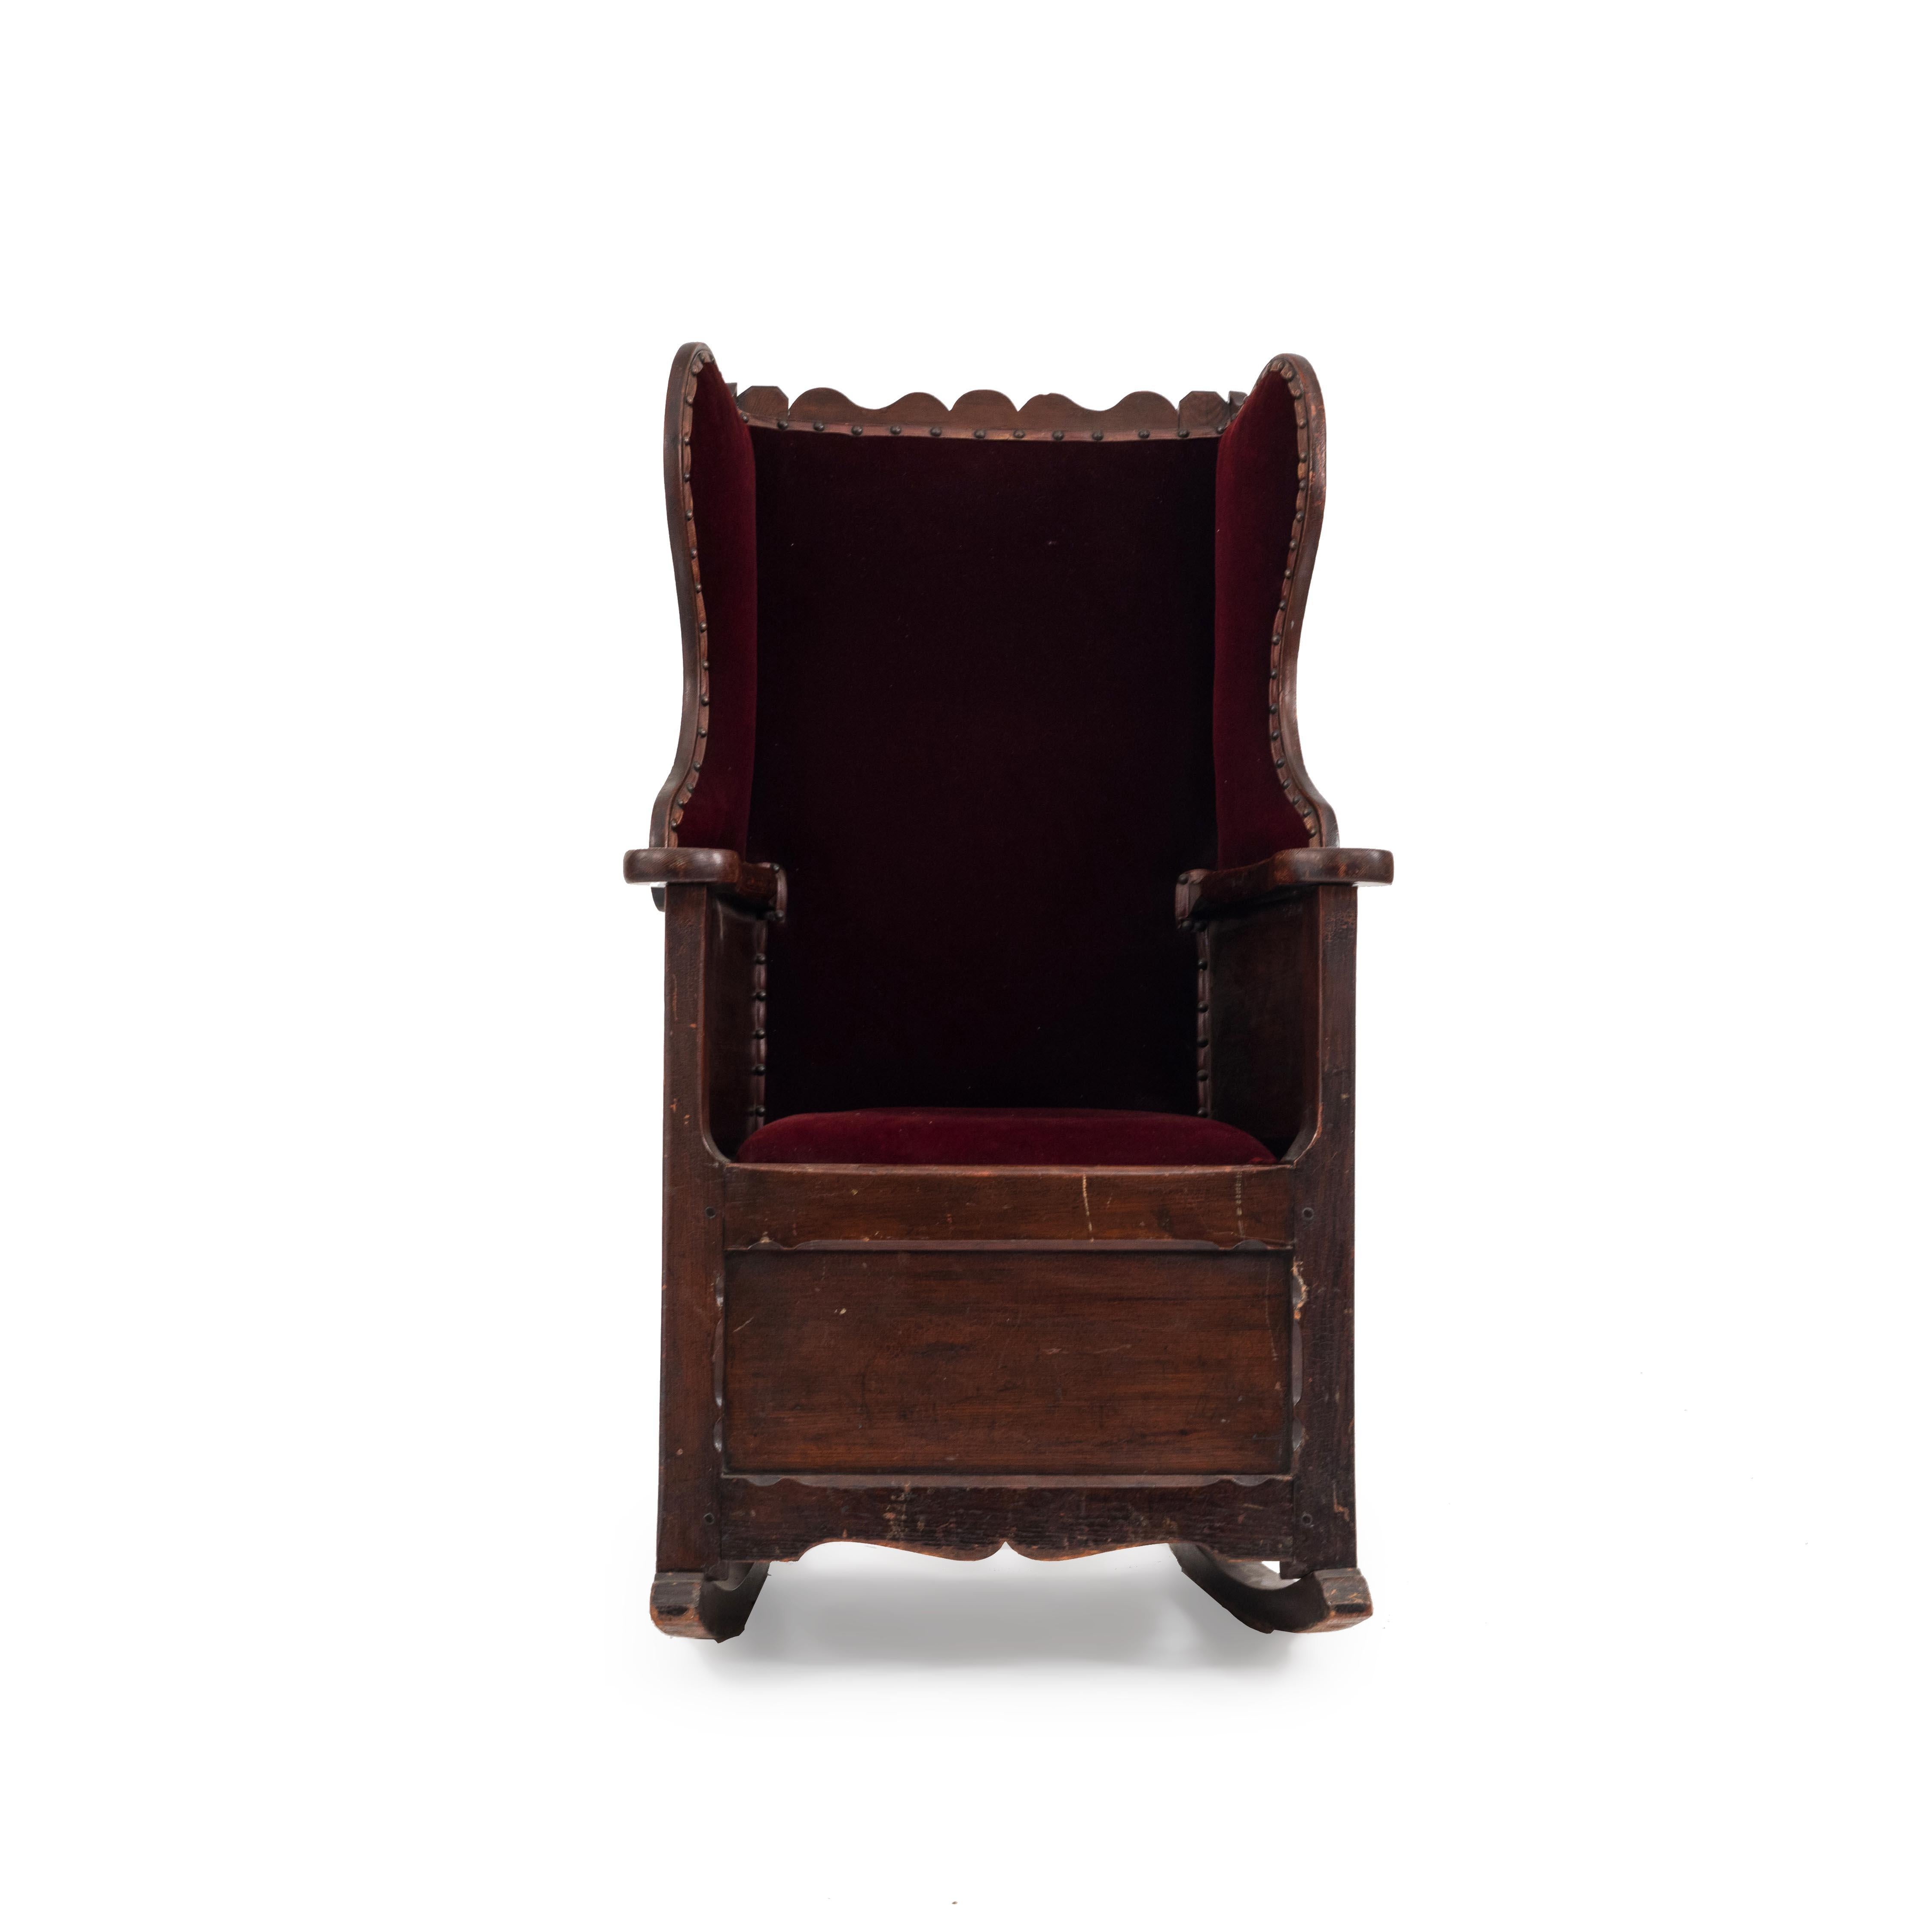 English Country (18/19th Cent) antique winged back pine rocking chair with scalloped back and red velvet upholstered seat & back.
 